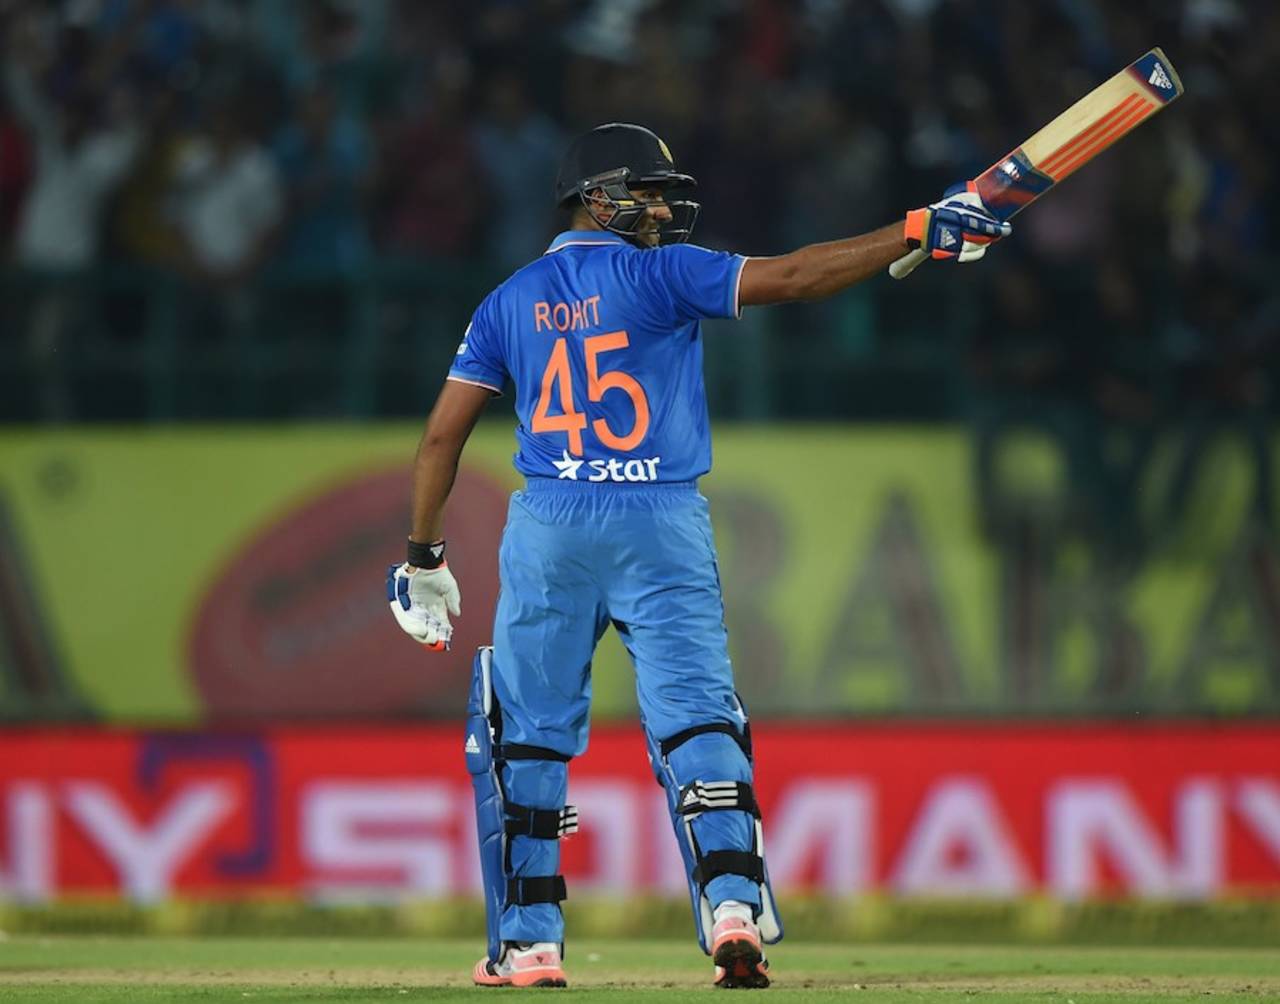 Rohit Sharma brings up his maiden T20I hundred, India v South Africa, 1st T20, Dharamsala, October 2, 2015